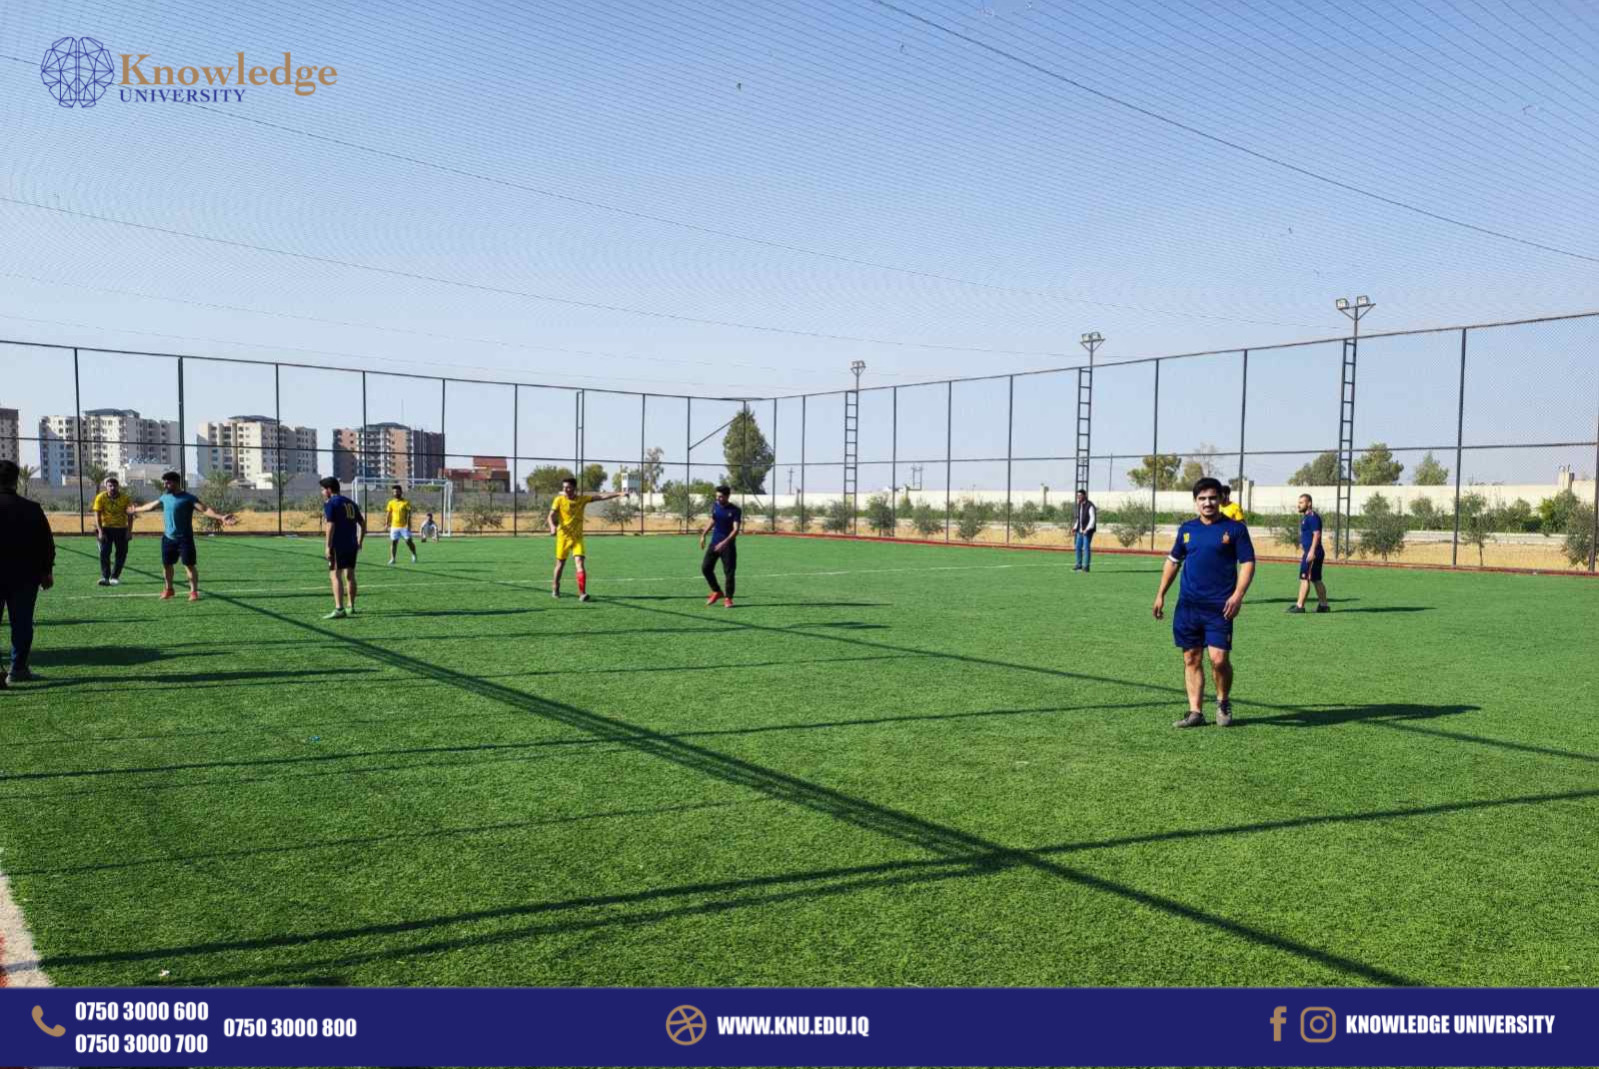 Knowledge University, conducted a sports activity